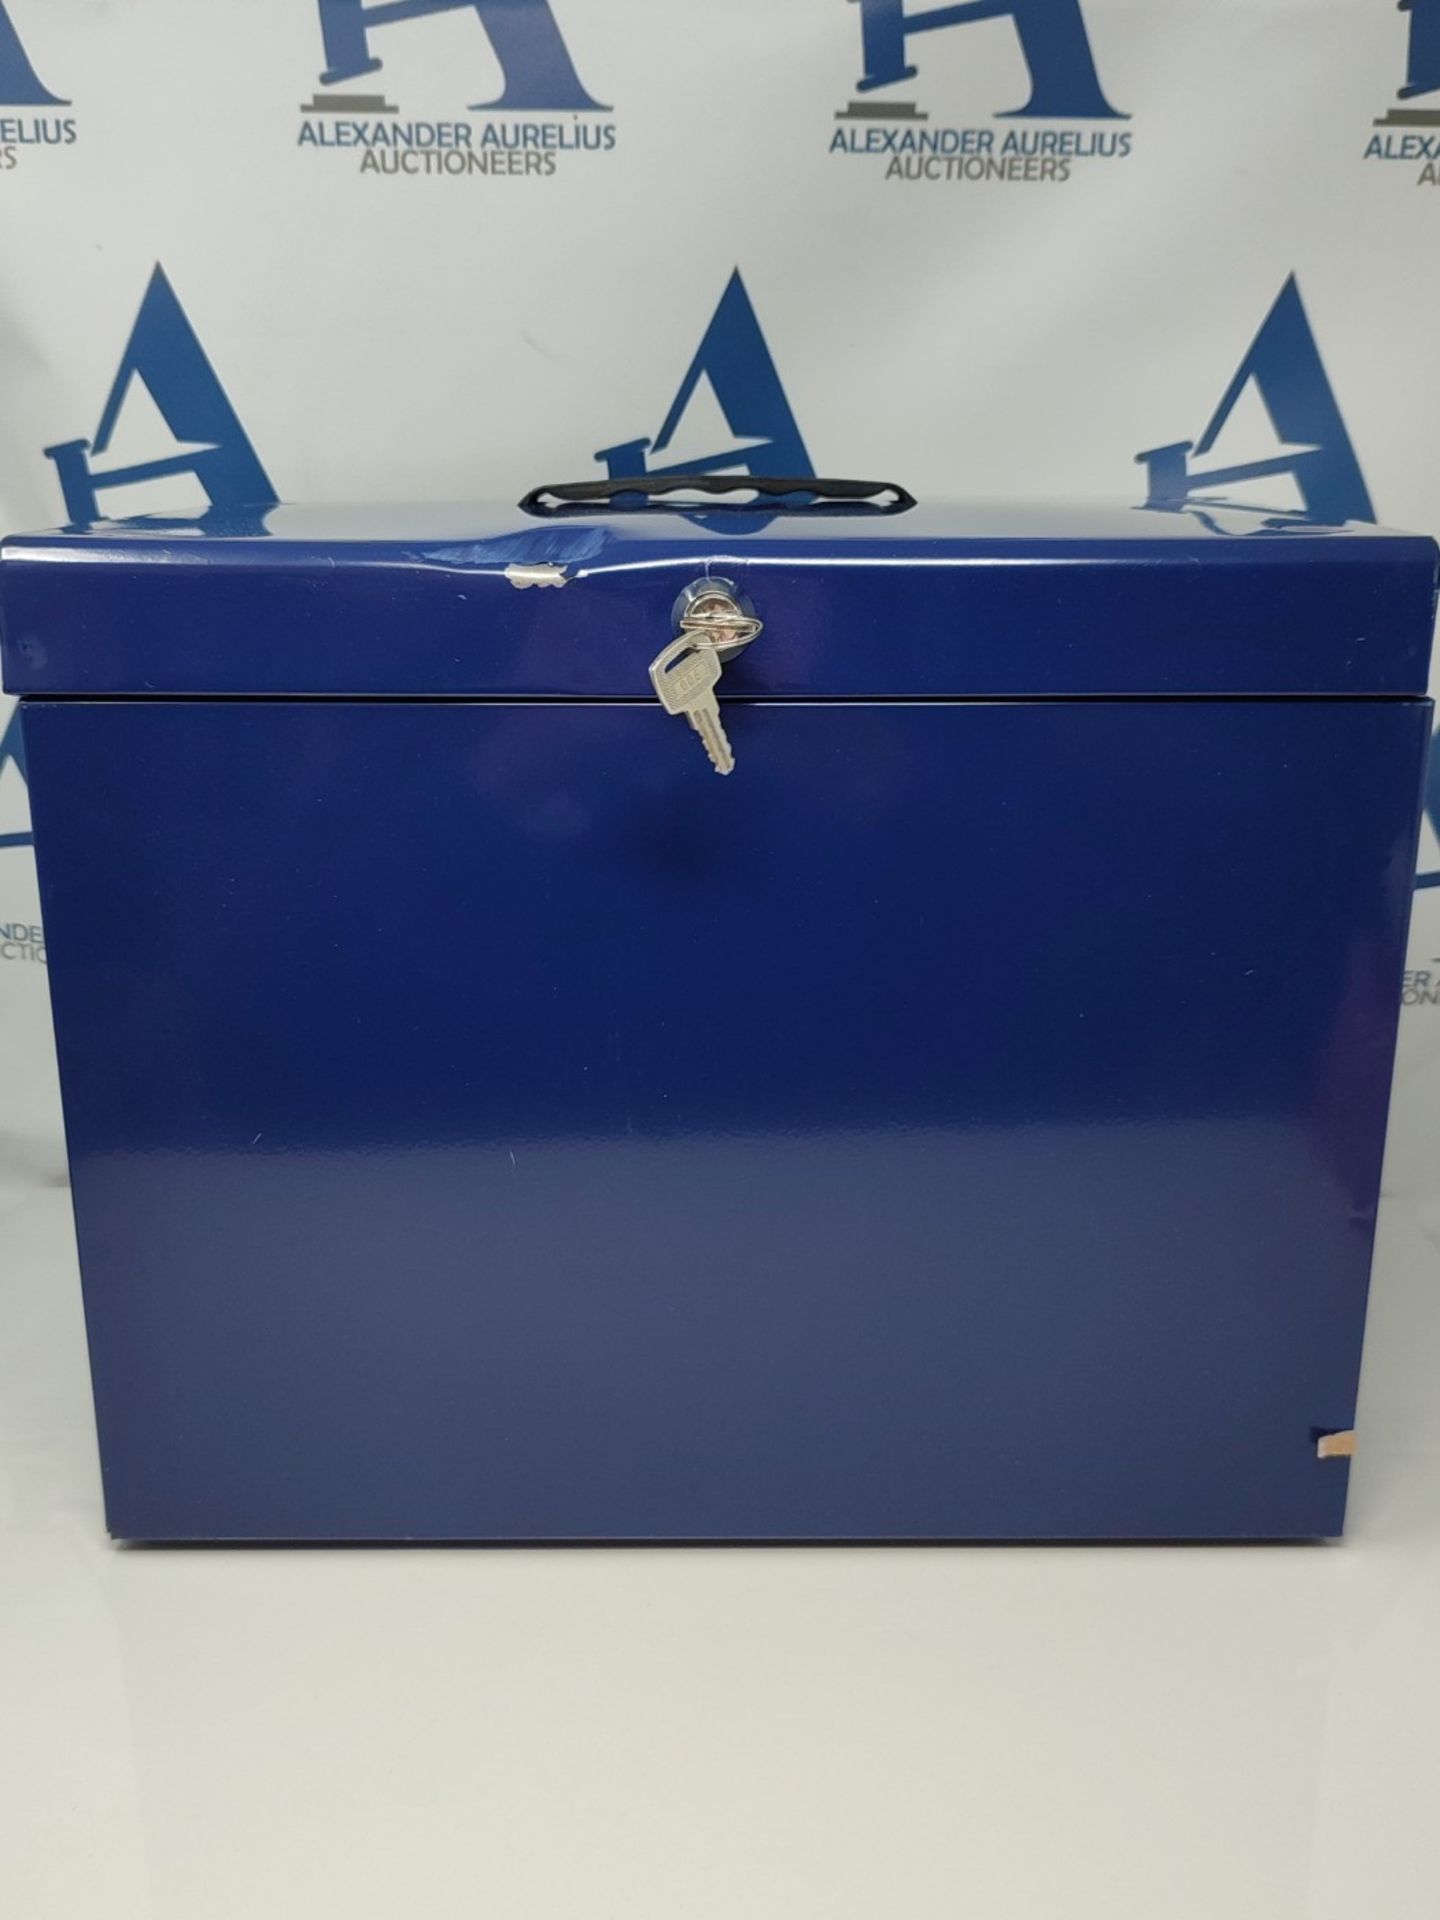 Cathedral Metal A4 File Box - Blue Home - Image 2 of 3